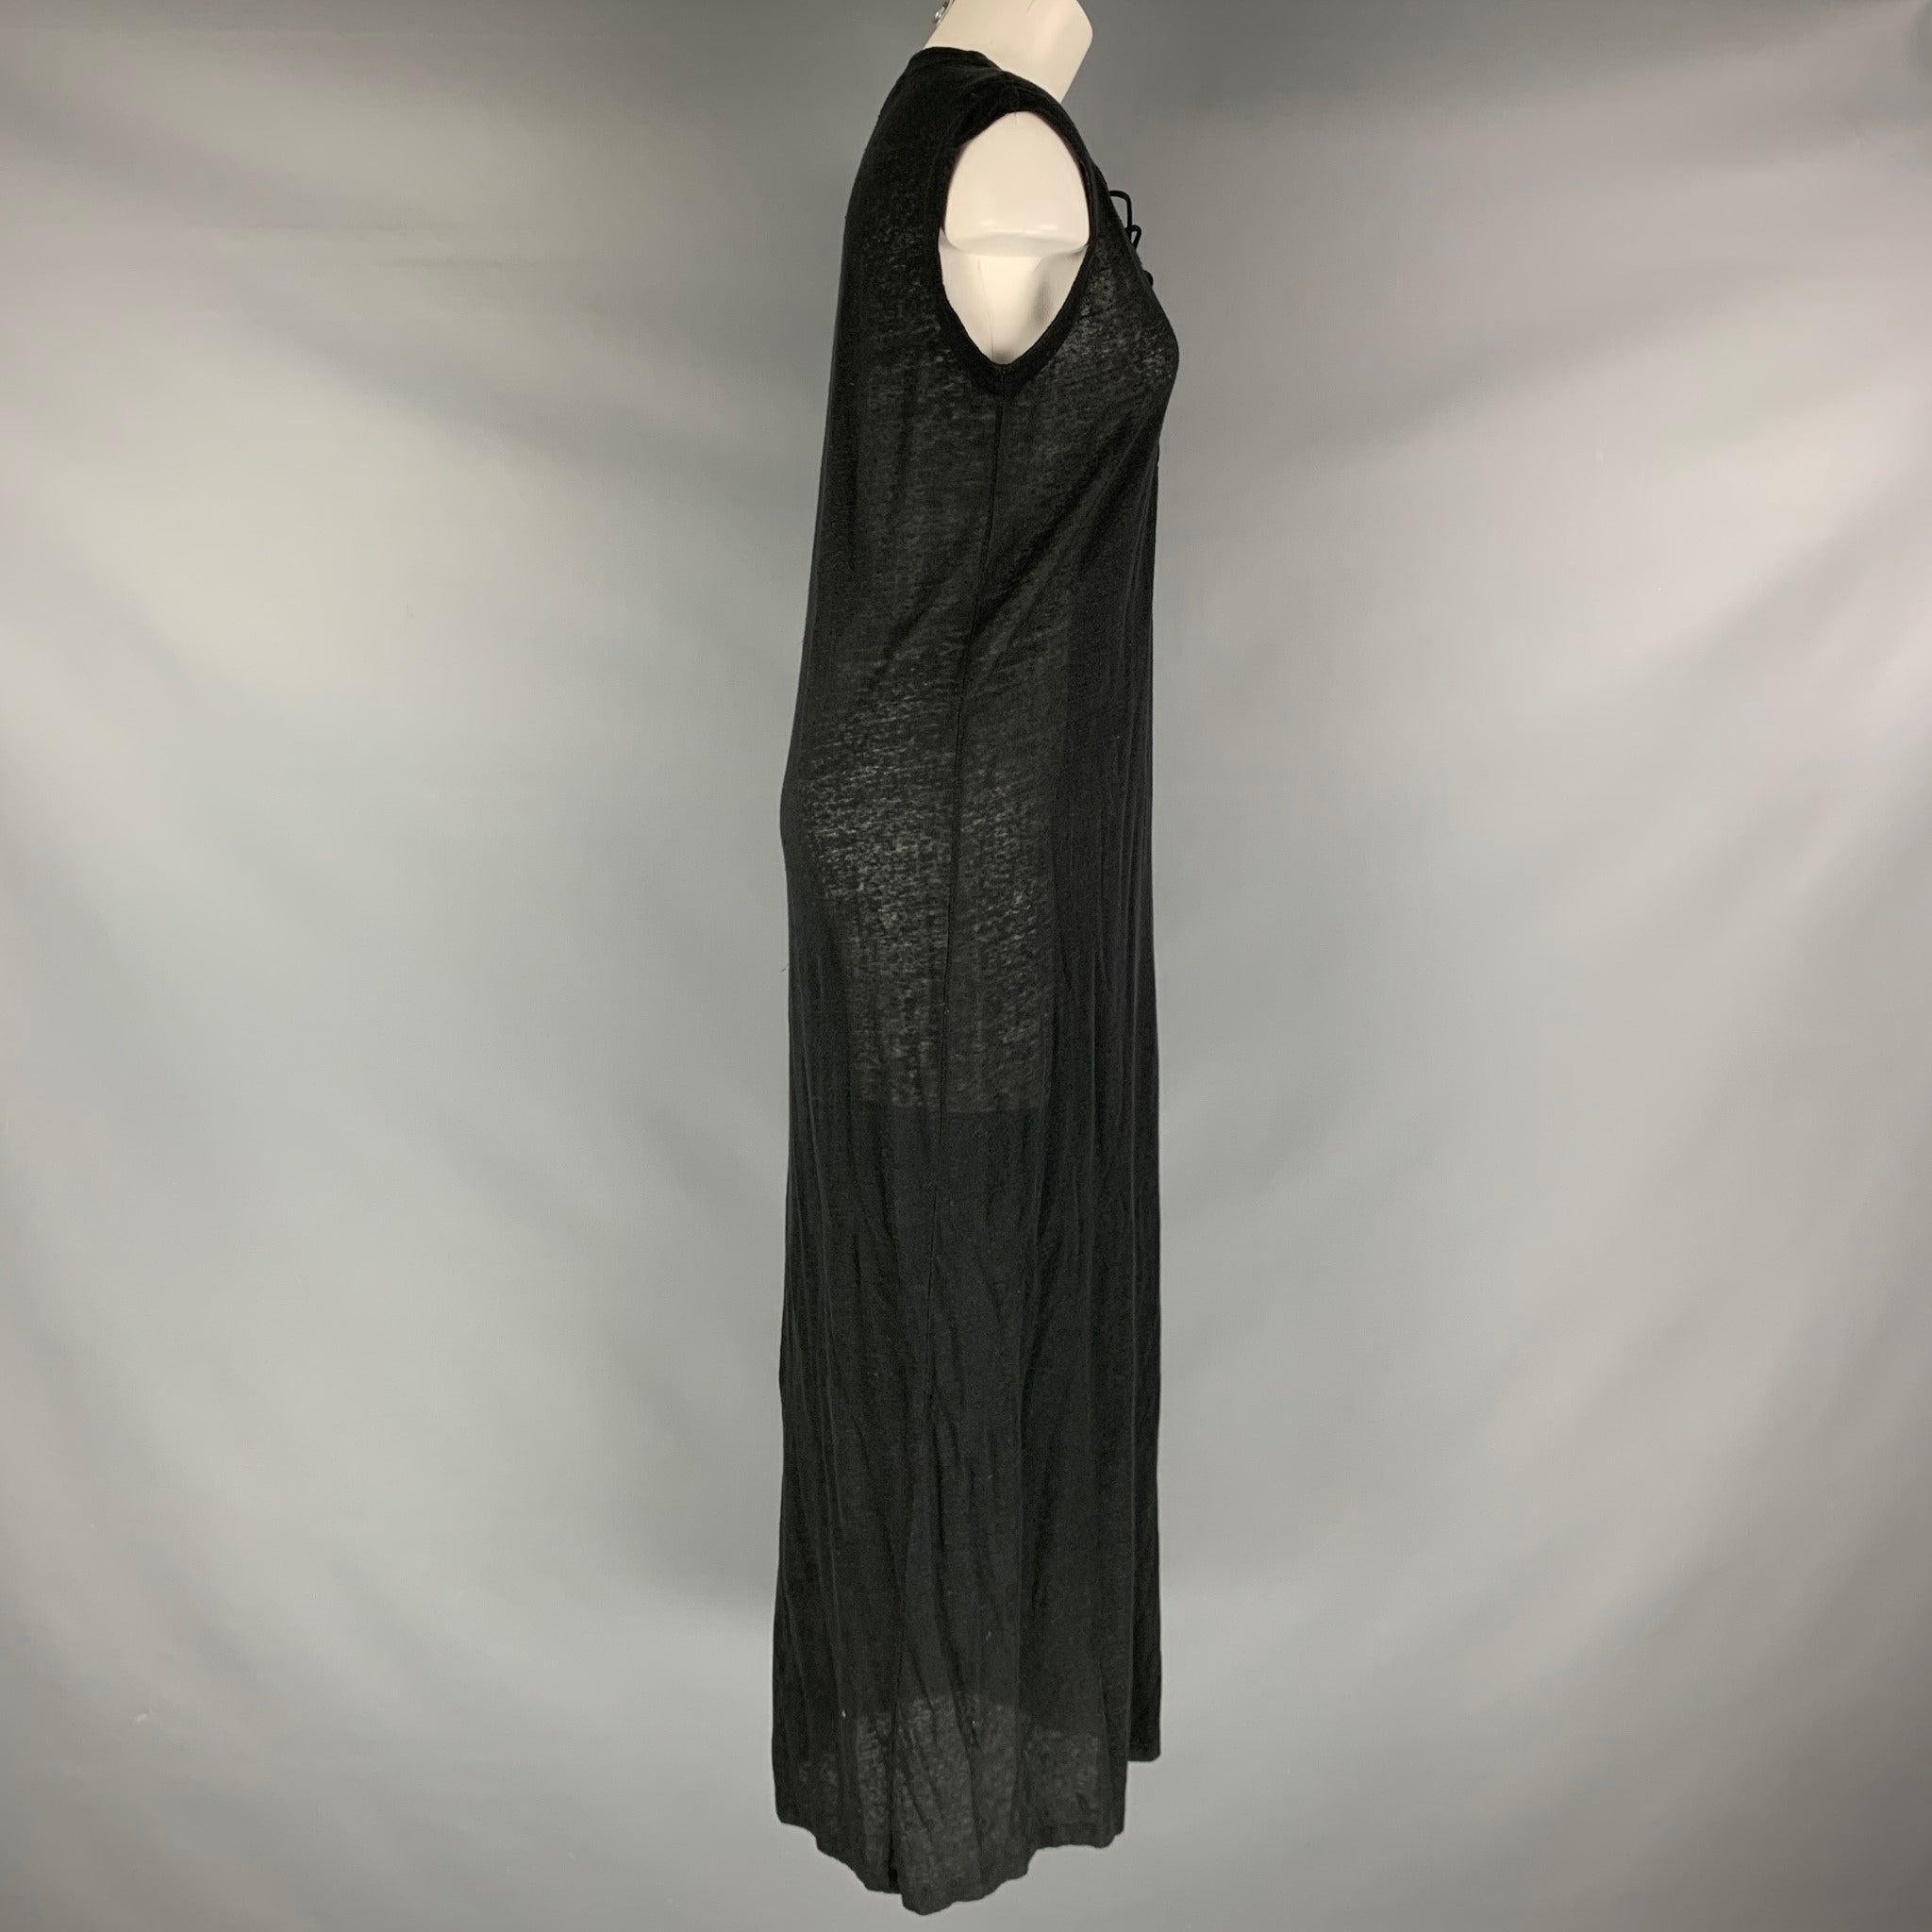 IRO 'Daisy 17S' long dress comes in a black partially see through cotton blend knit material featuring a see laced chest detail and shift dress silhouette. Excellent Pre-Owned Condition. 

Marked:  SShoulder: 17.5 inches Bust: 42 inches Hip: 42